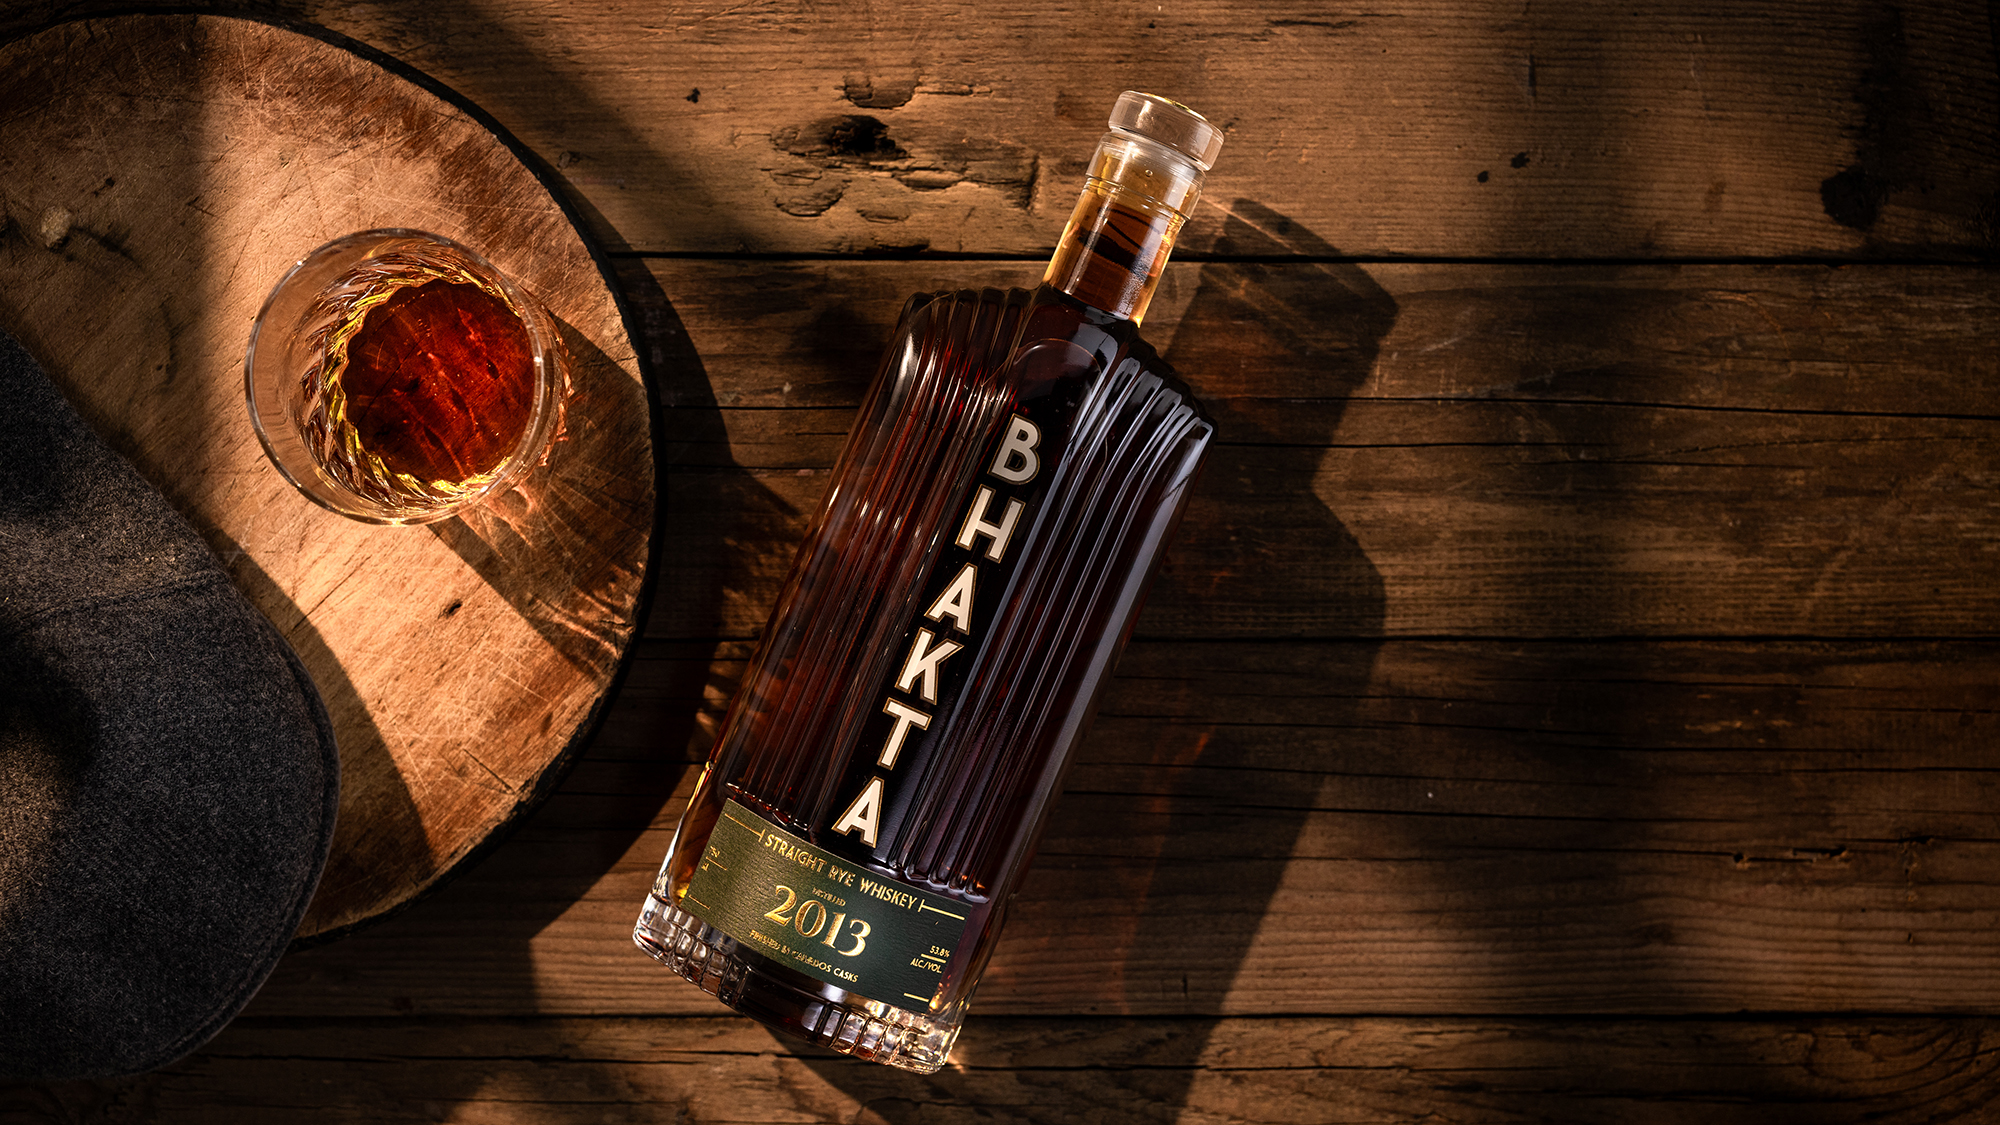 Bhakta Drops First Rye Whiskey Since WhistlePig